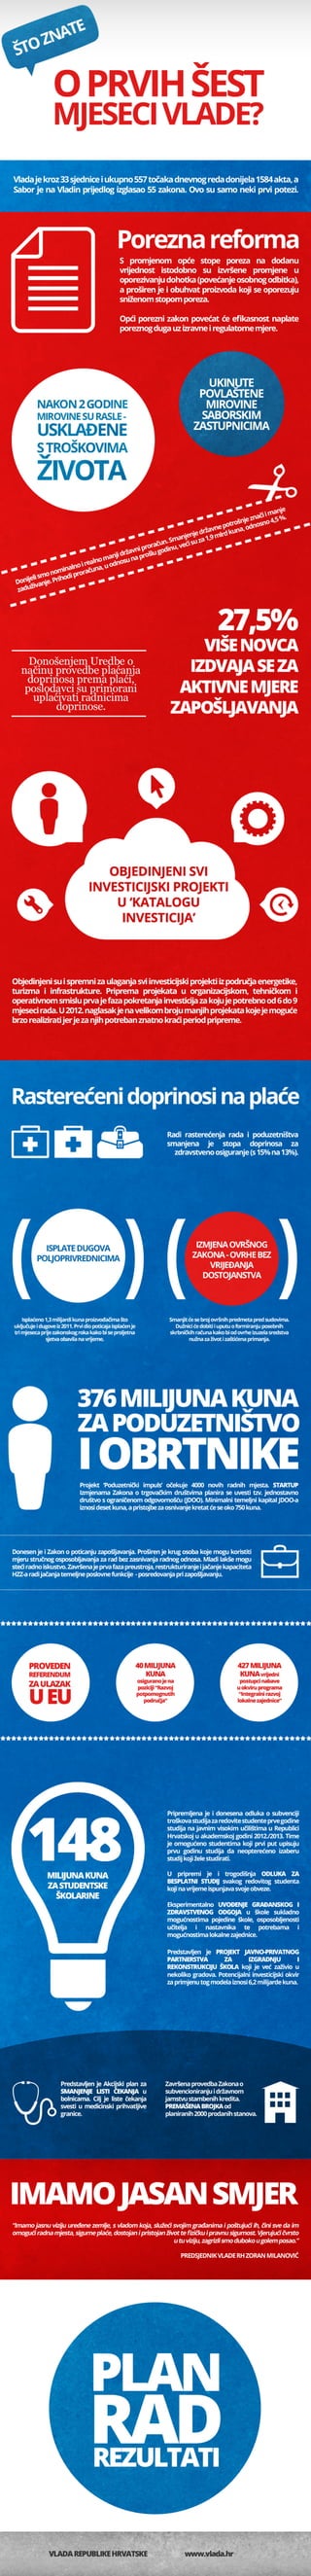 Croatian Government's 1st Six Months [Infographic]